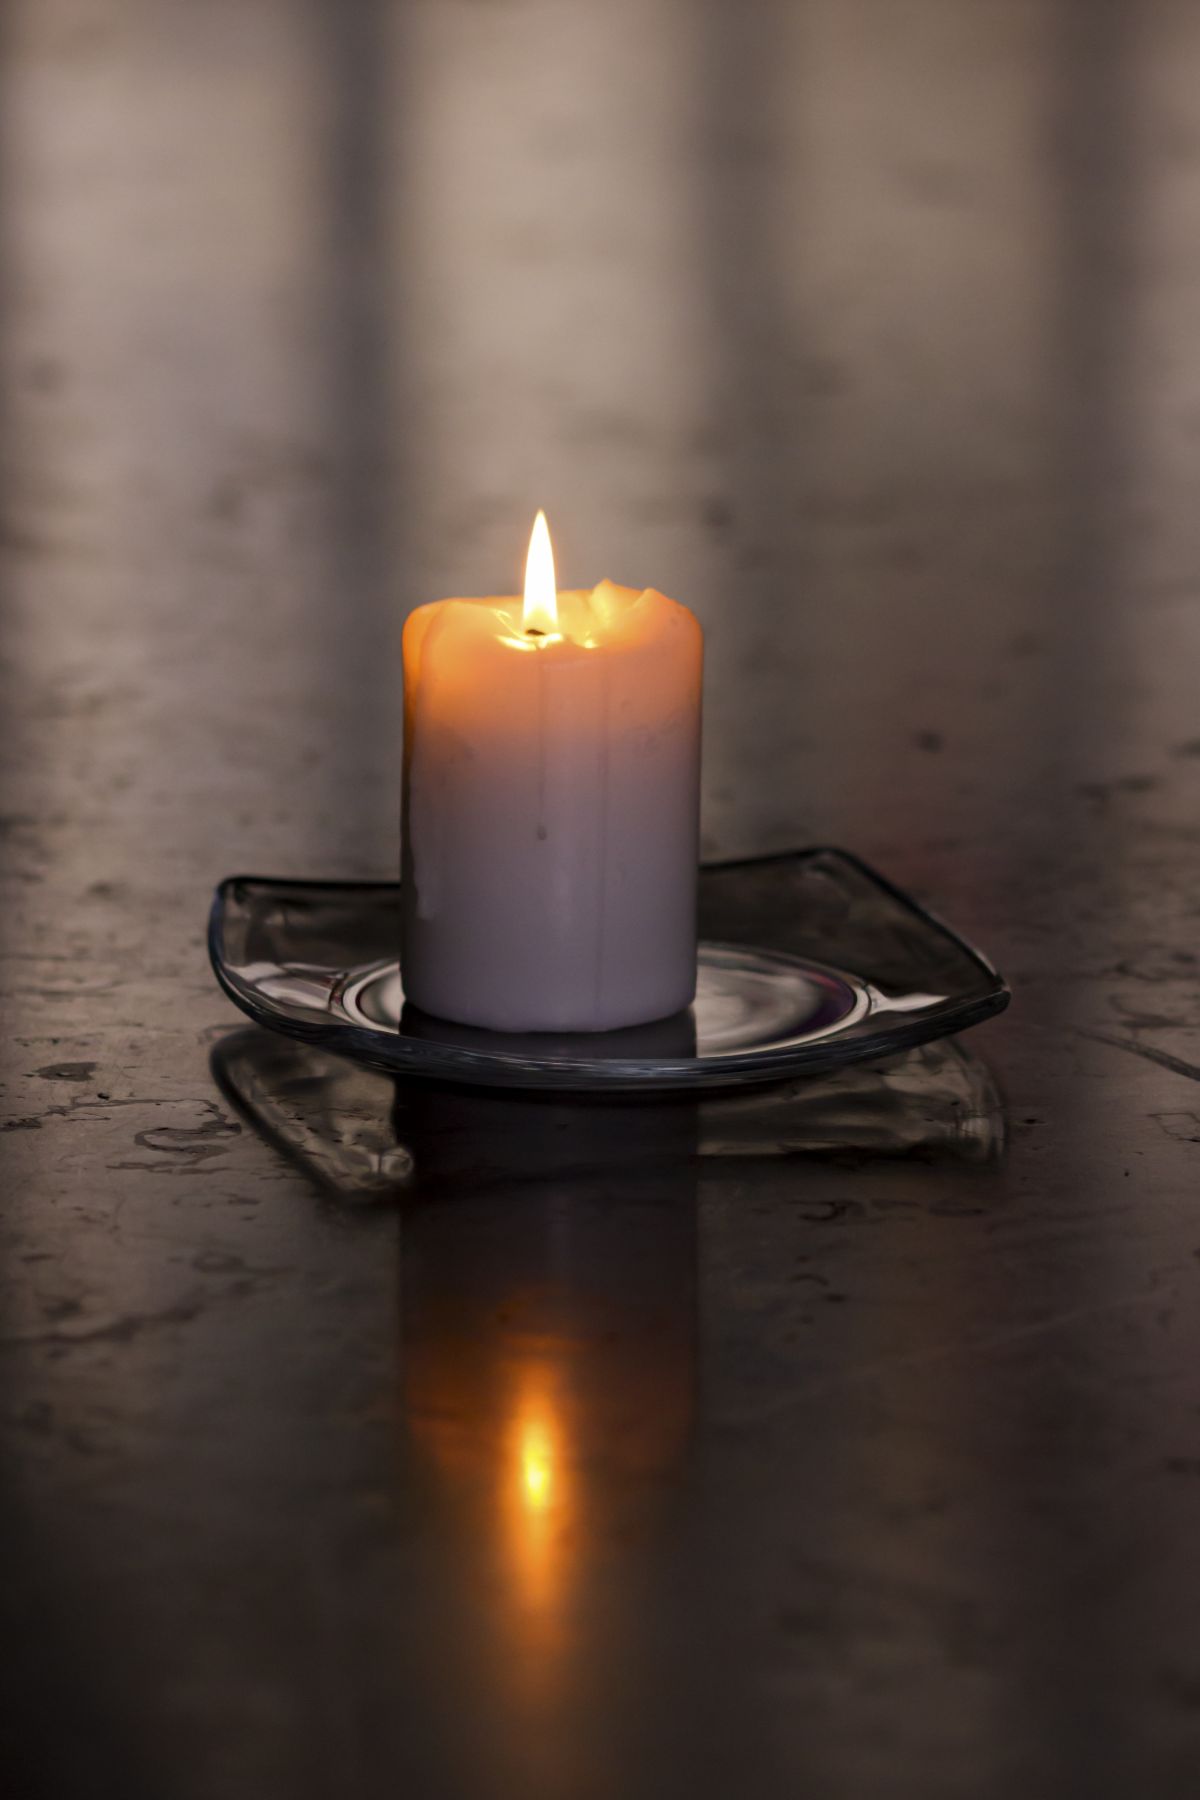 a single lit candle on a glass saucer sits on a table